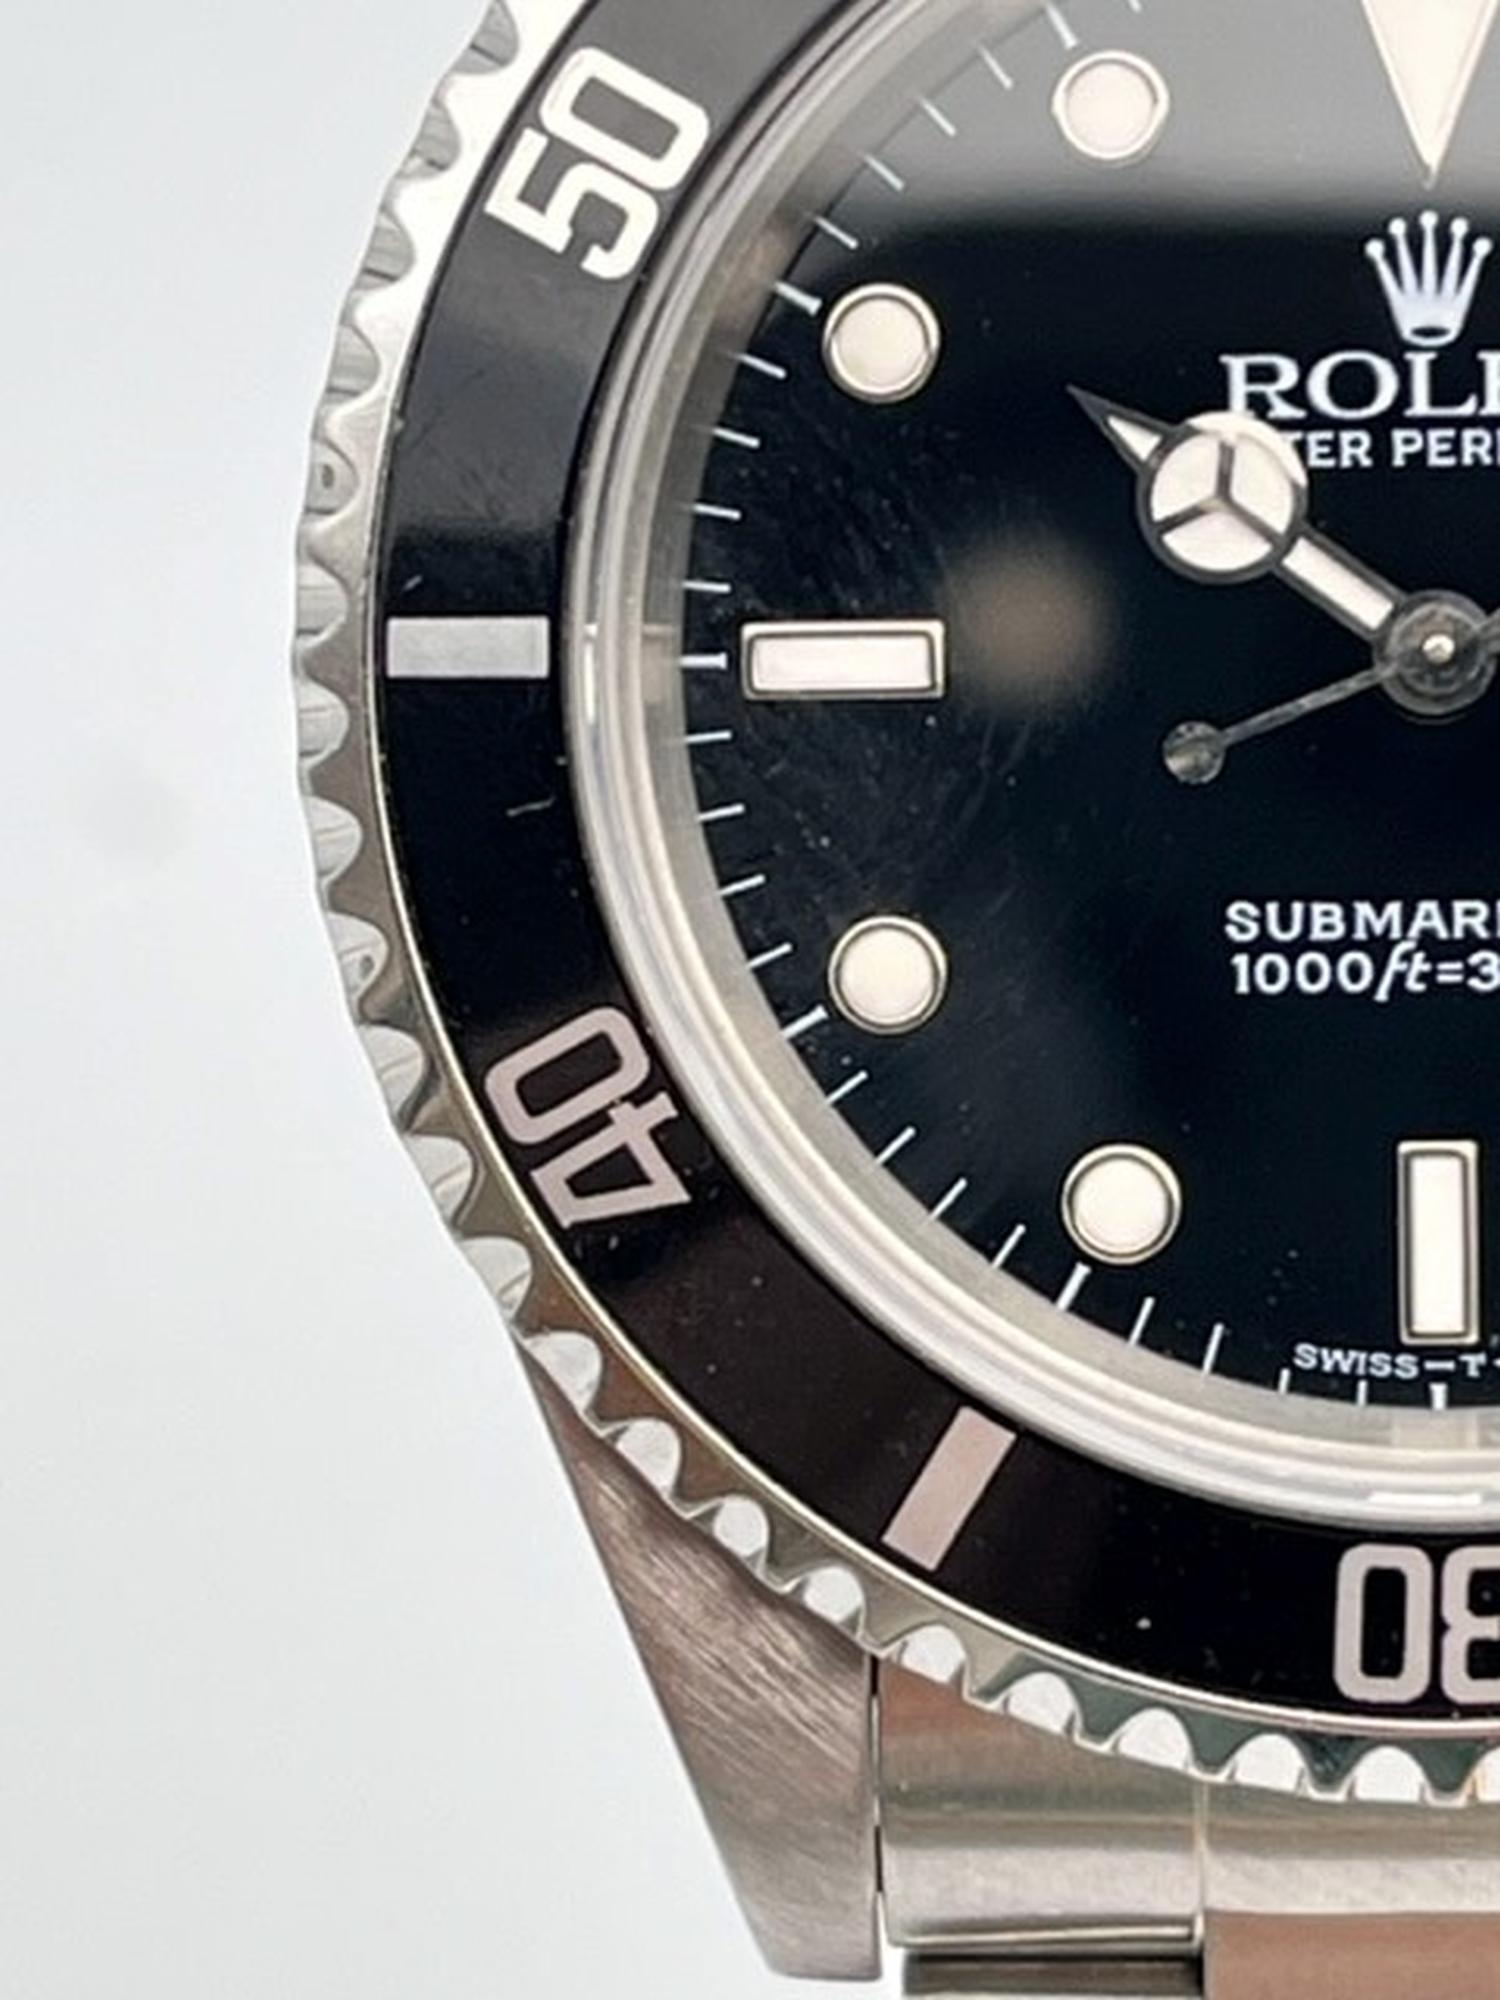 ROLEX SUBMARINER NO DATE 14060 WITH BOX AND PAPERS 1998 - Image 6 of 9